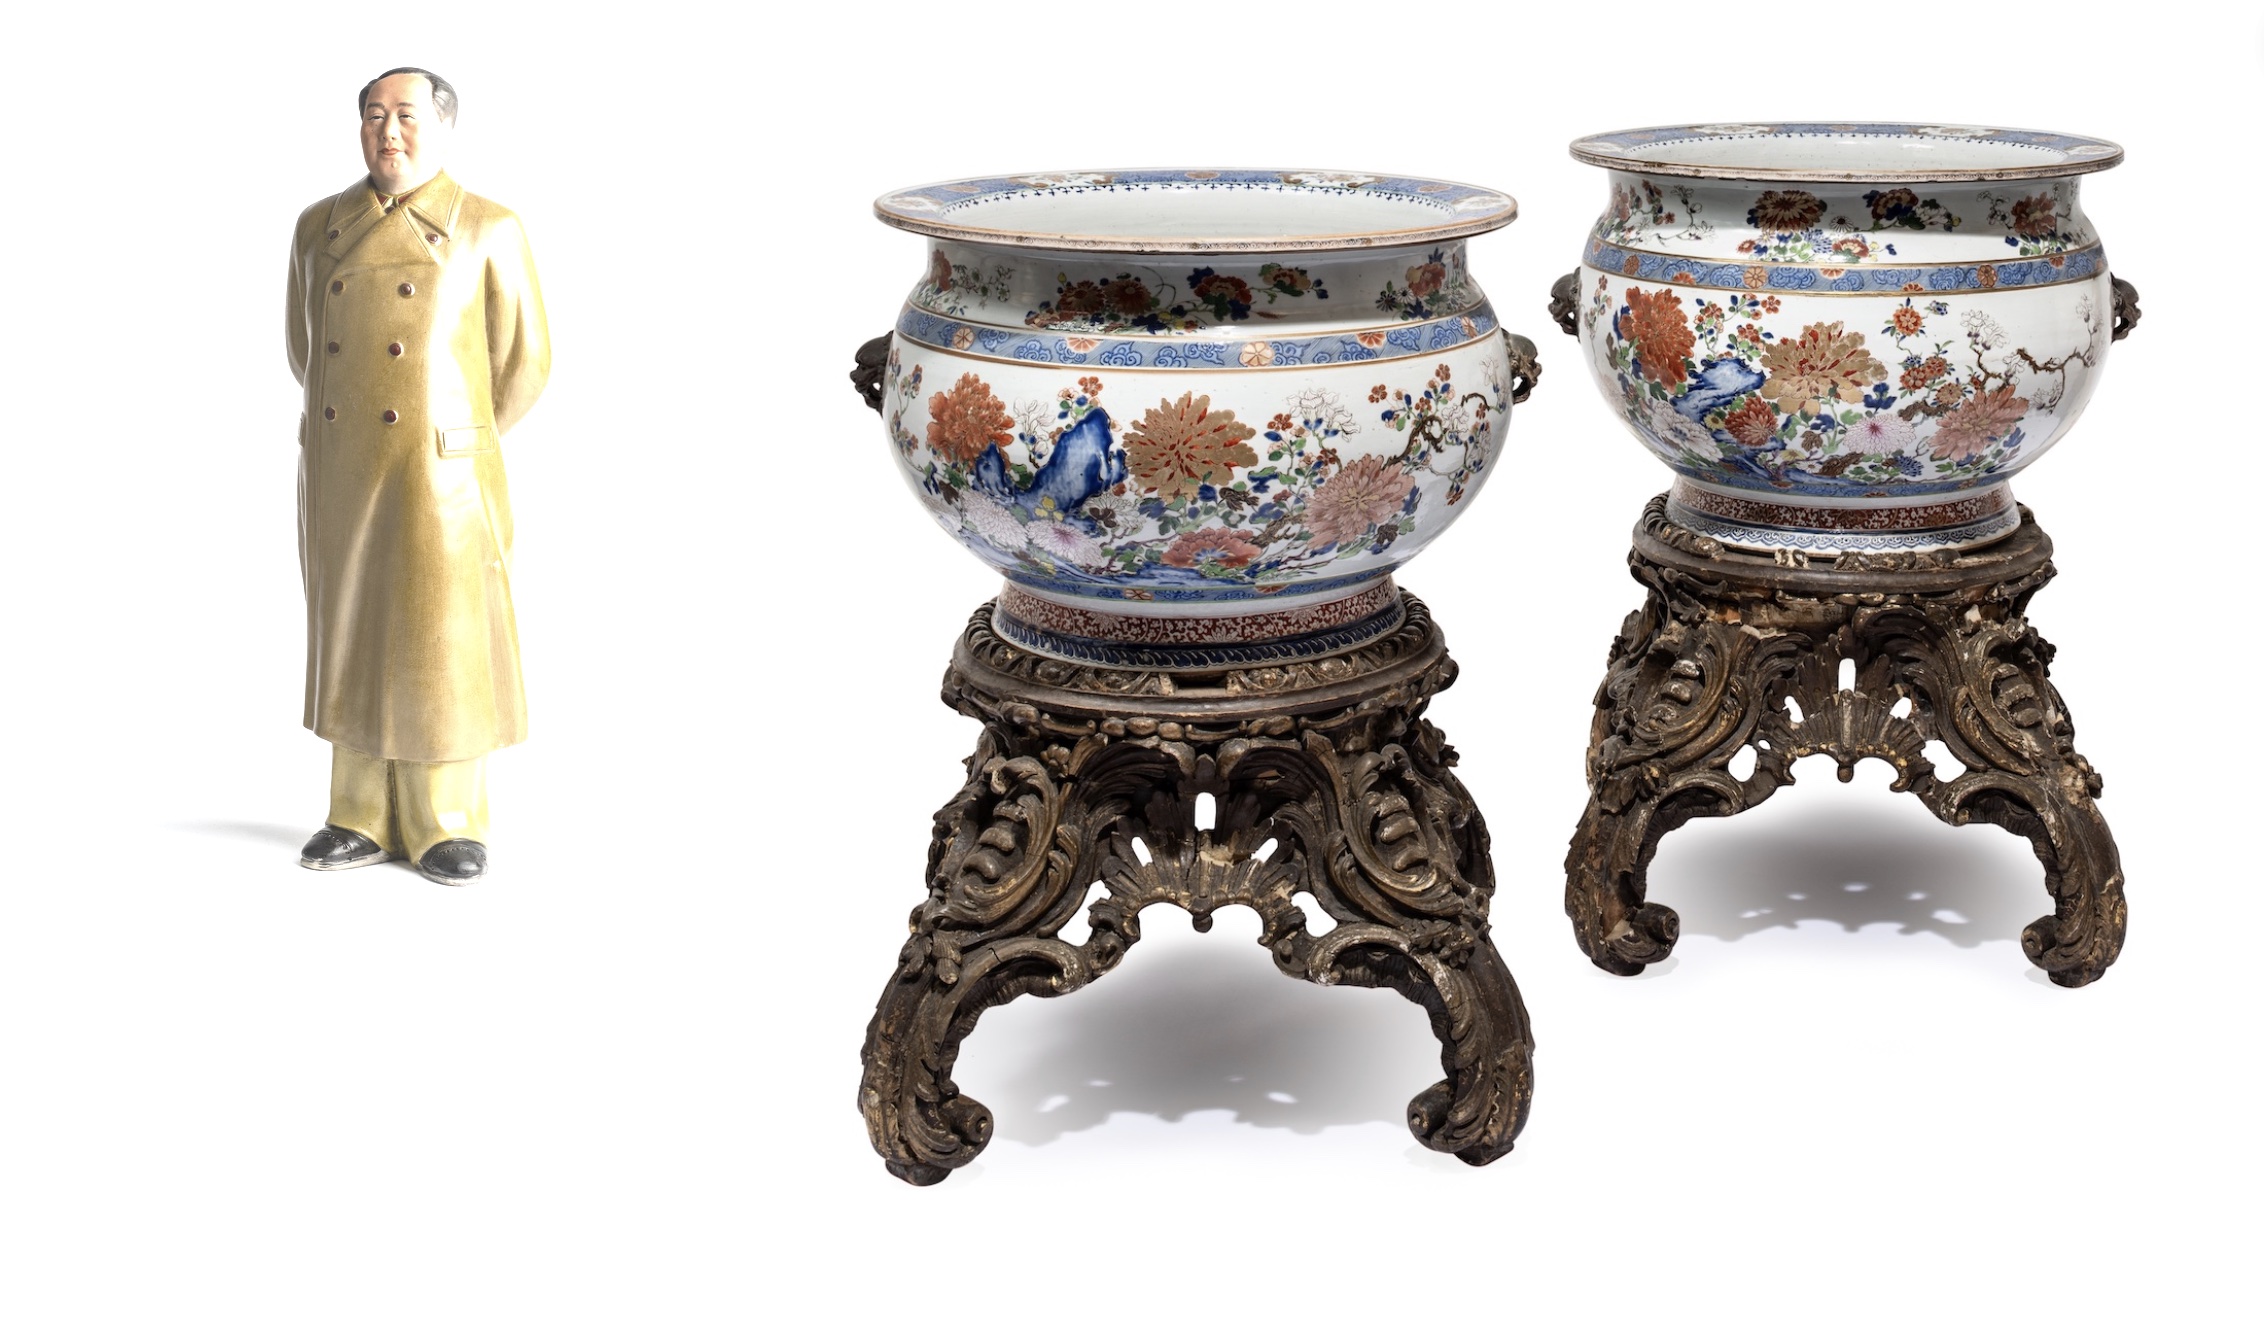 Chinese and Japanese Works of Art in dedicated sale – Antique Collecting